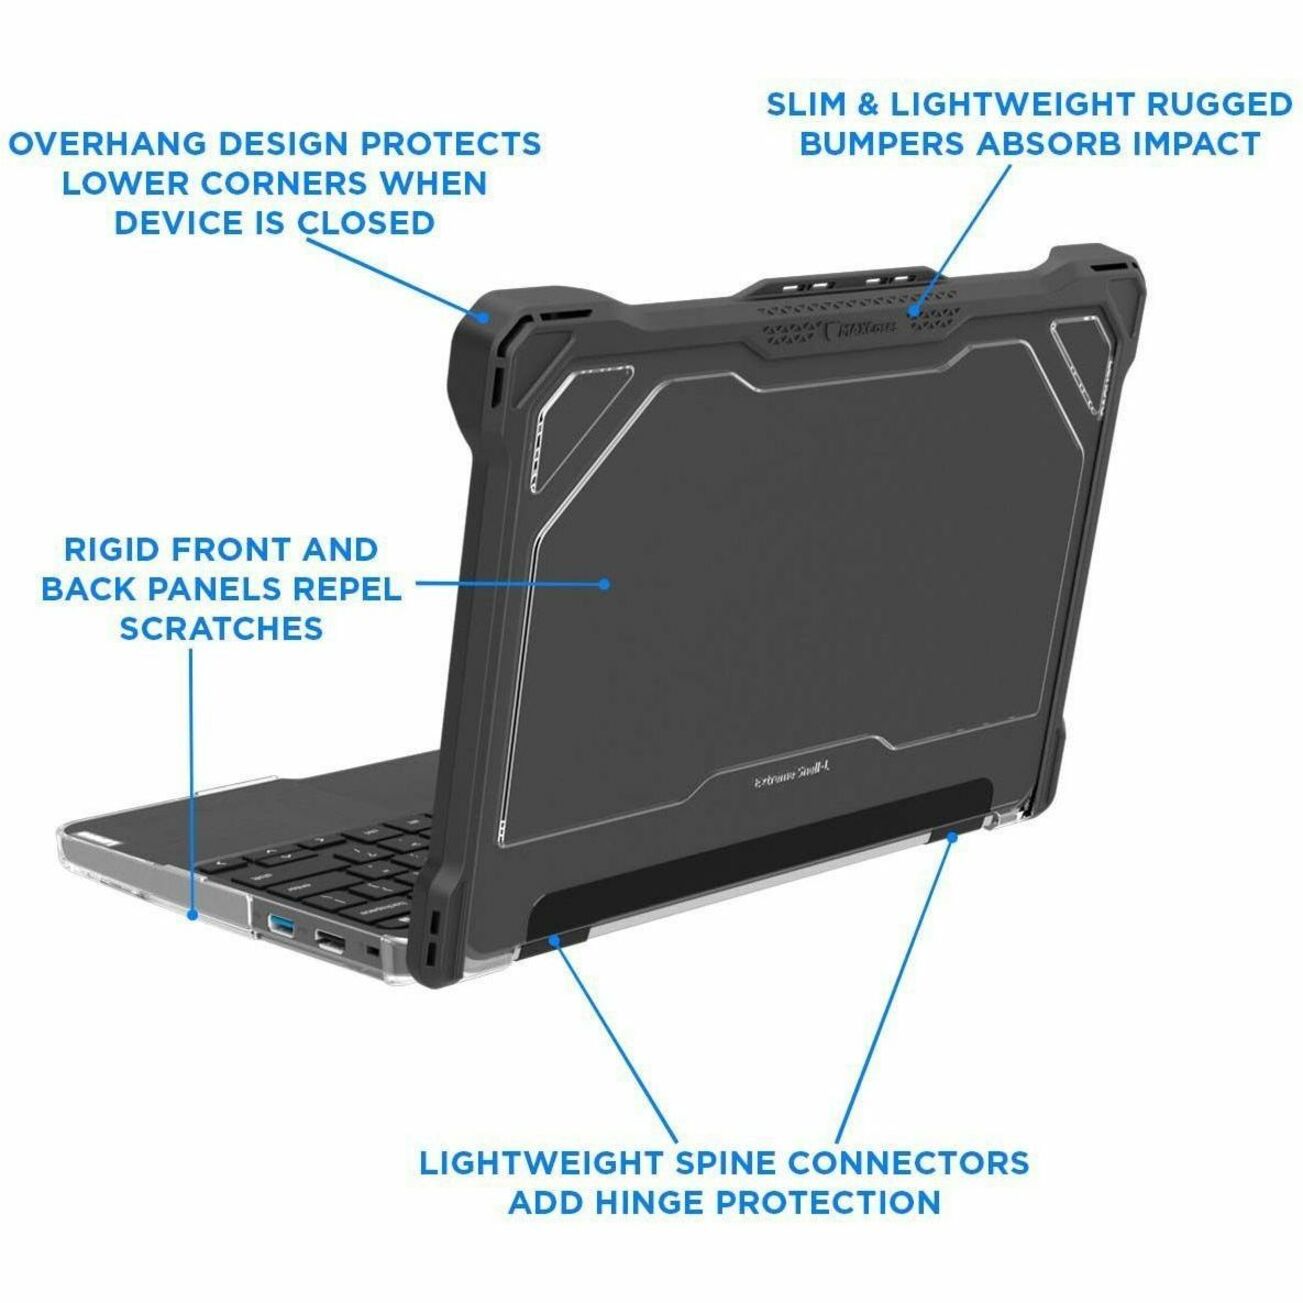 MAXCases LN-ESL-100E-G3-BCLR Extreme Shell-L for Lenovo 100e G3 Chromebook 11" Black/Clear, Rugged, Impact Resistant, Textured Grip